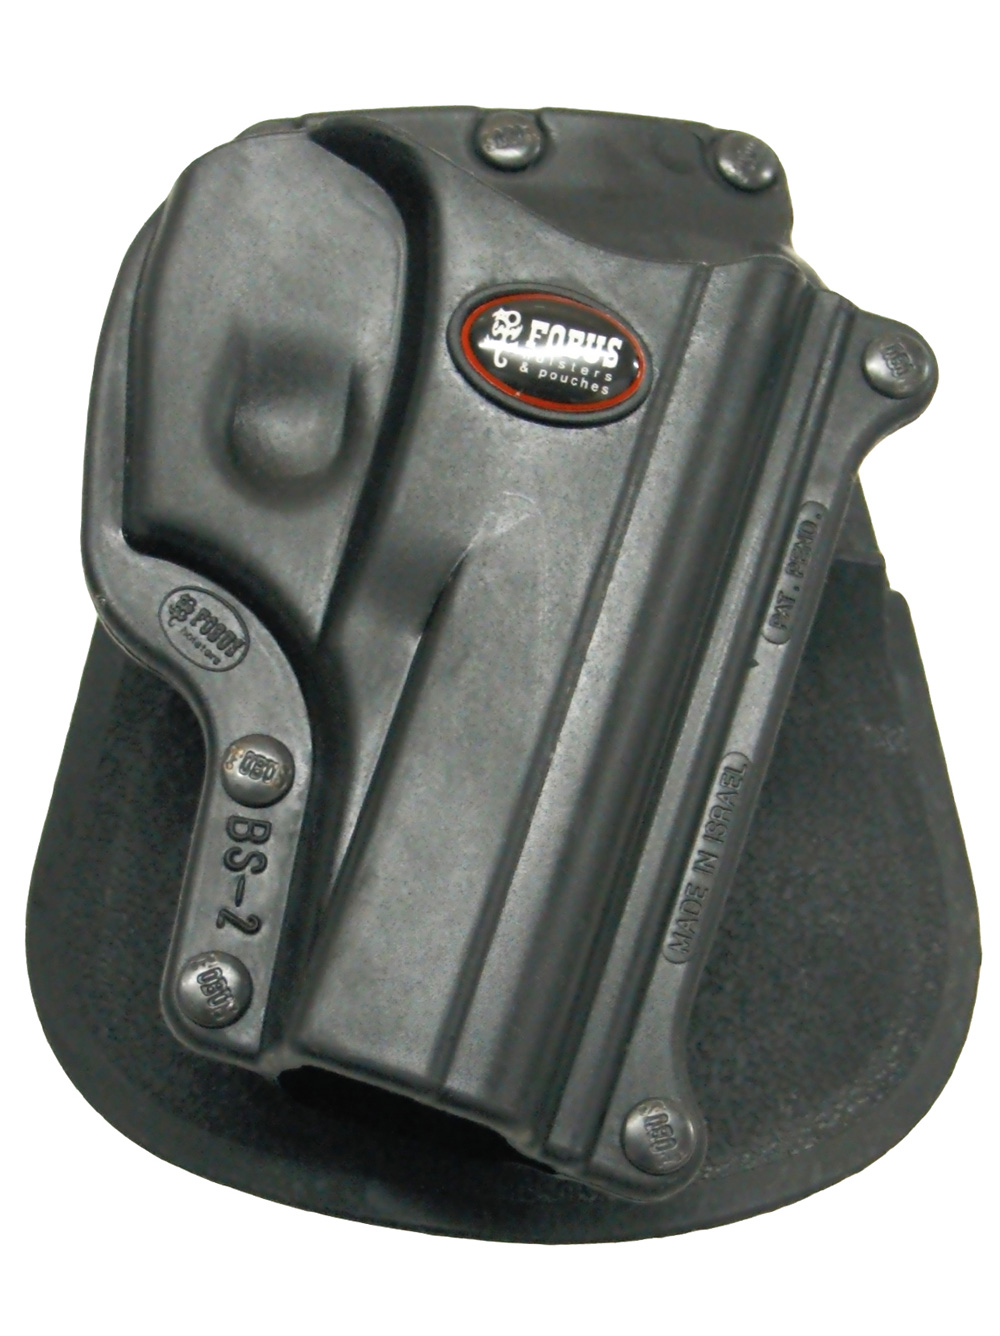 Details about   Tagua PD3-1202 Rotating Open Top Paddle Holster Bersa 380 Right Handed 